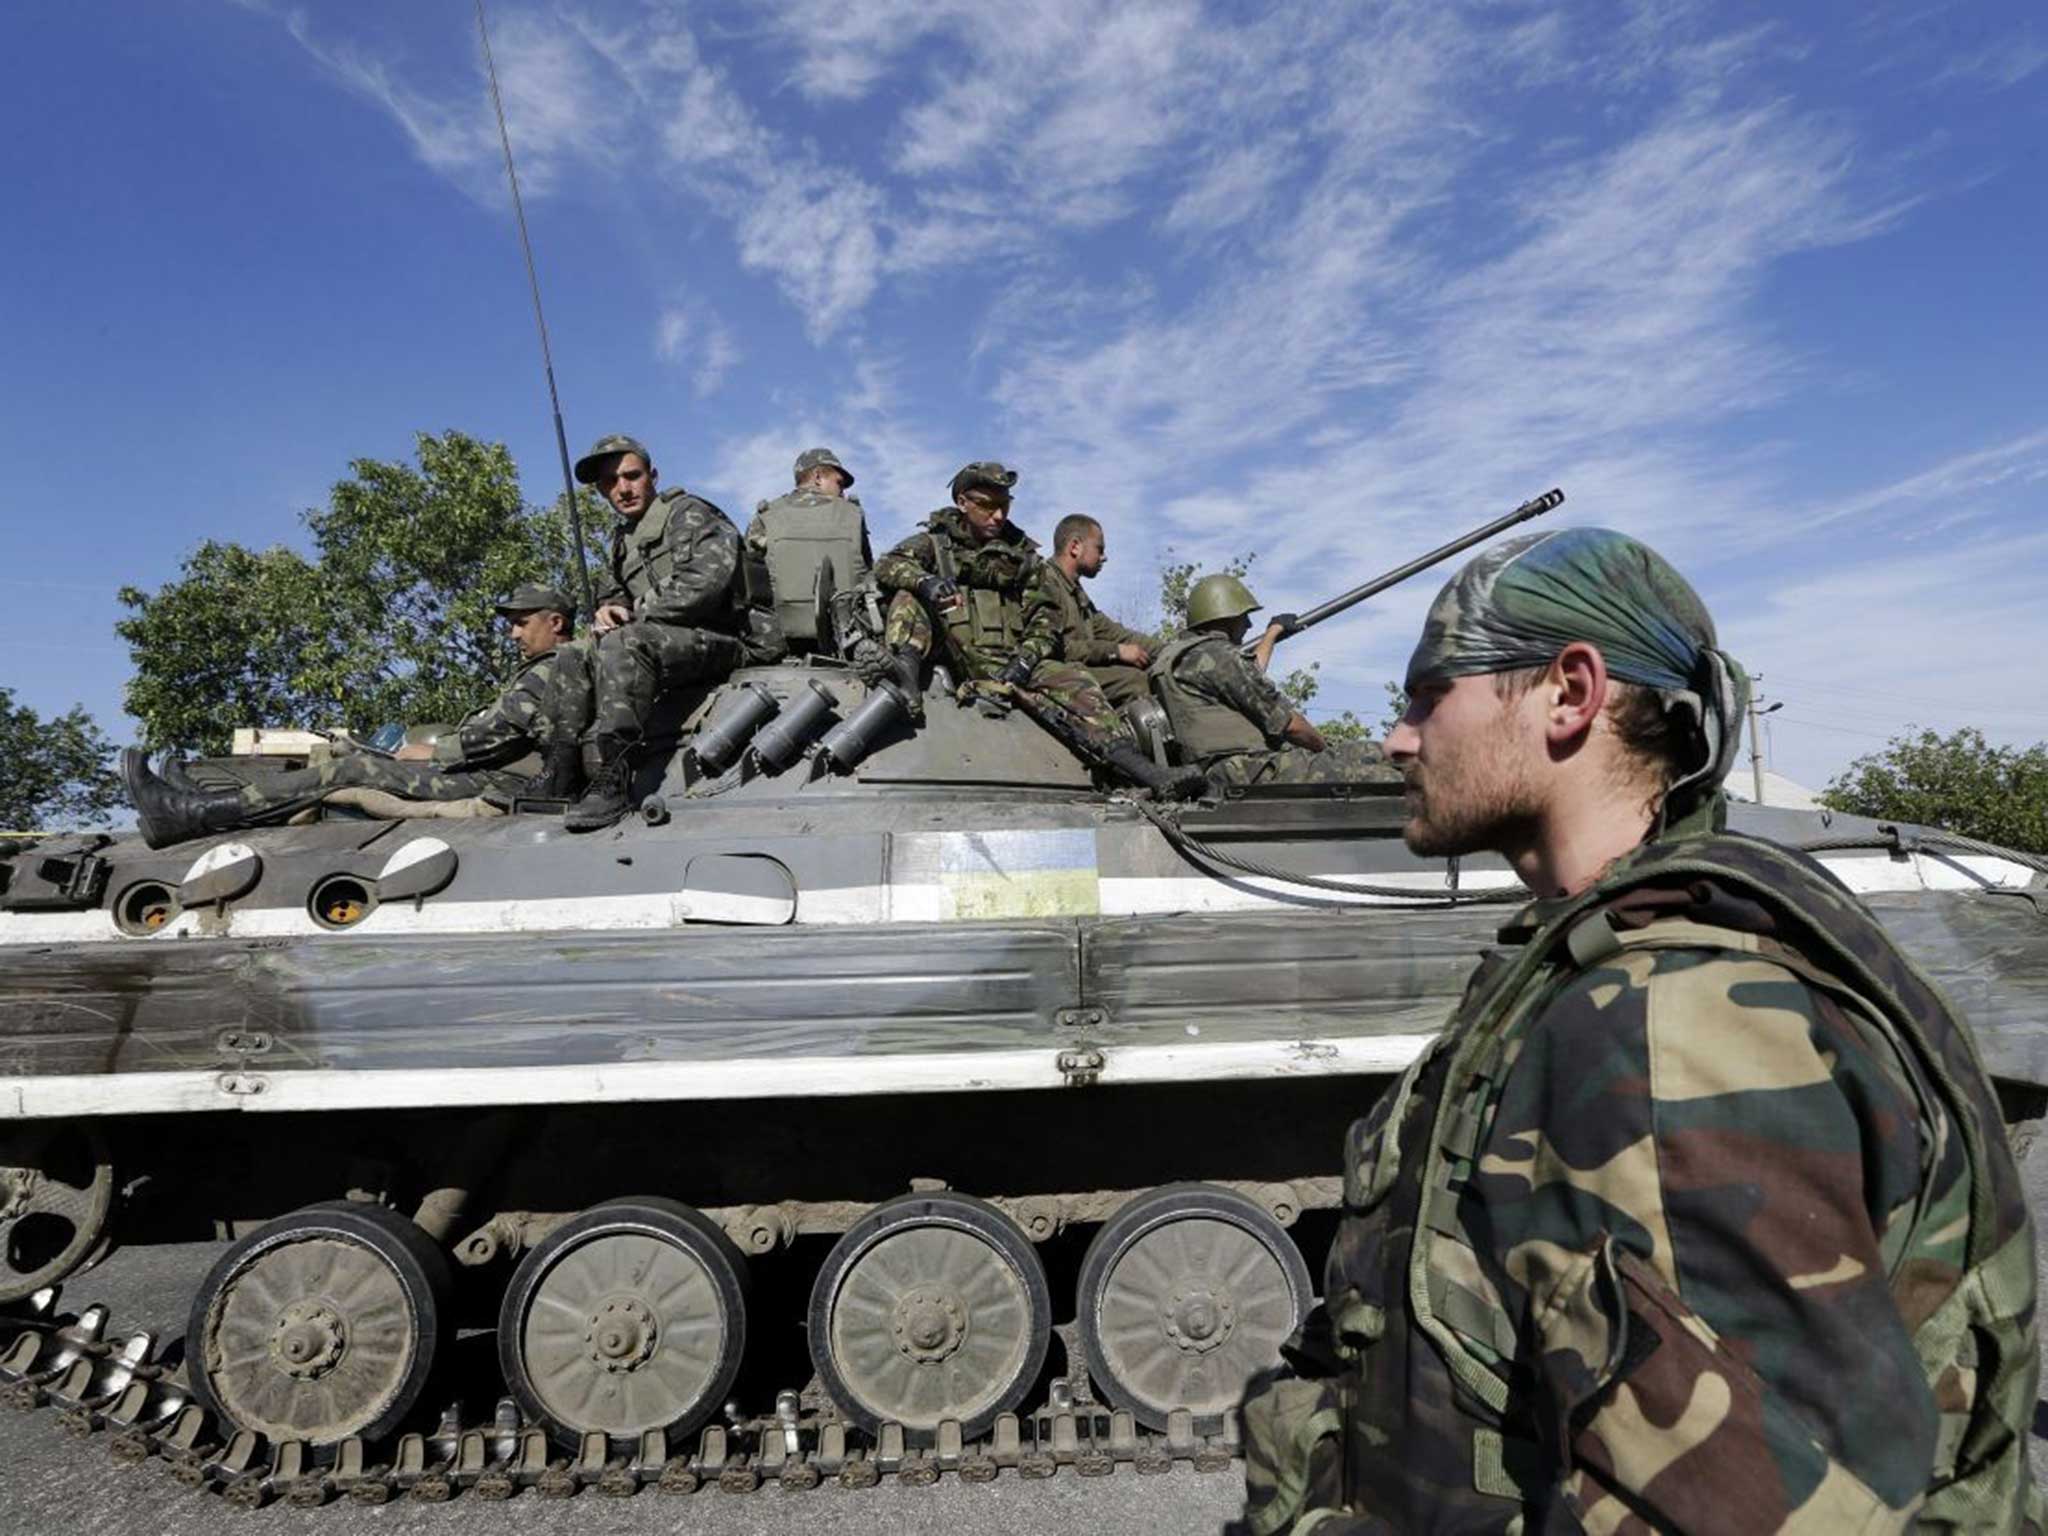 Ukraine crisis: Russia in a 'state of war' with our continent, European